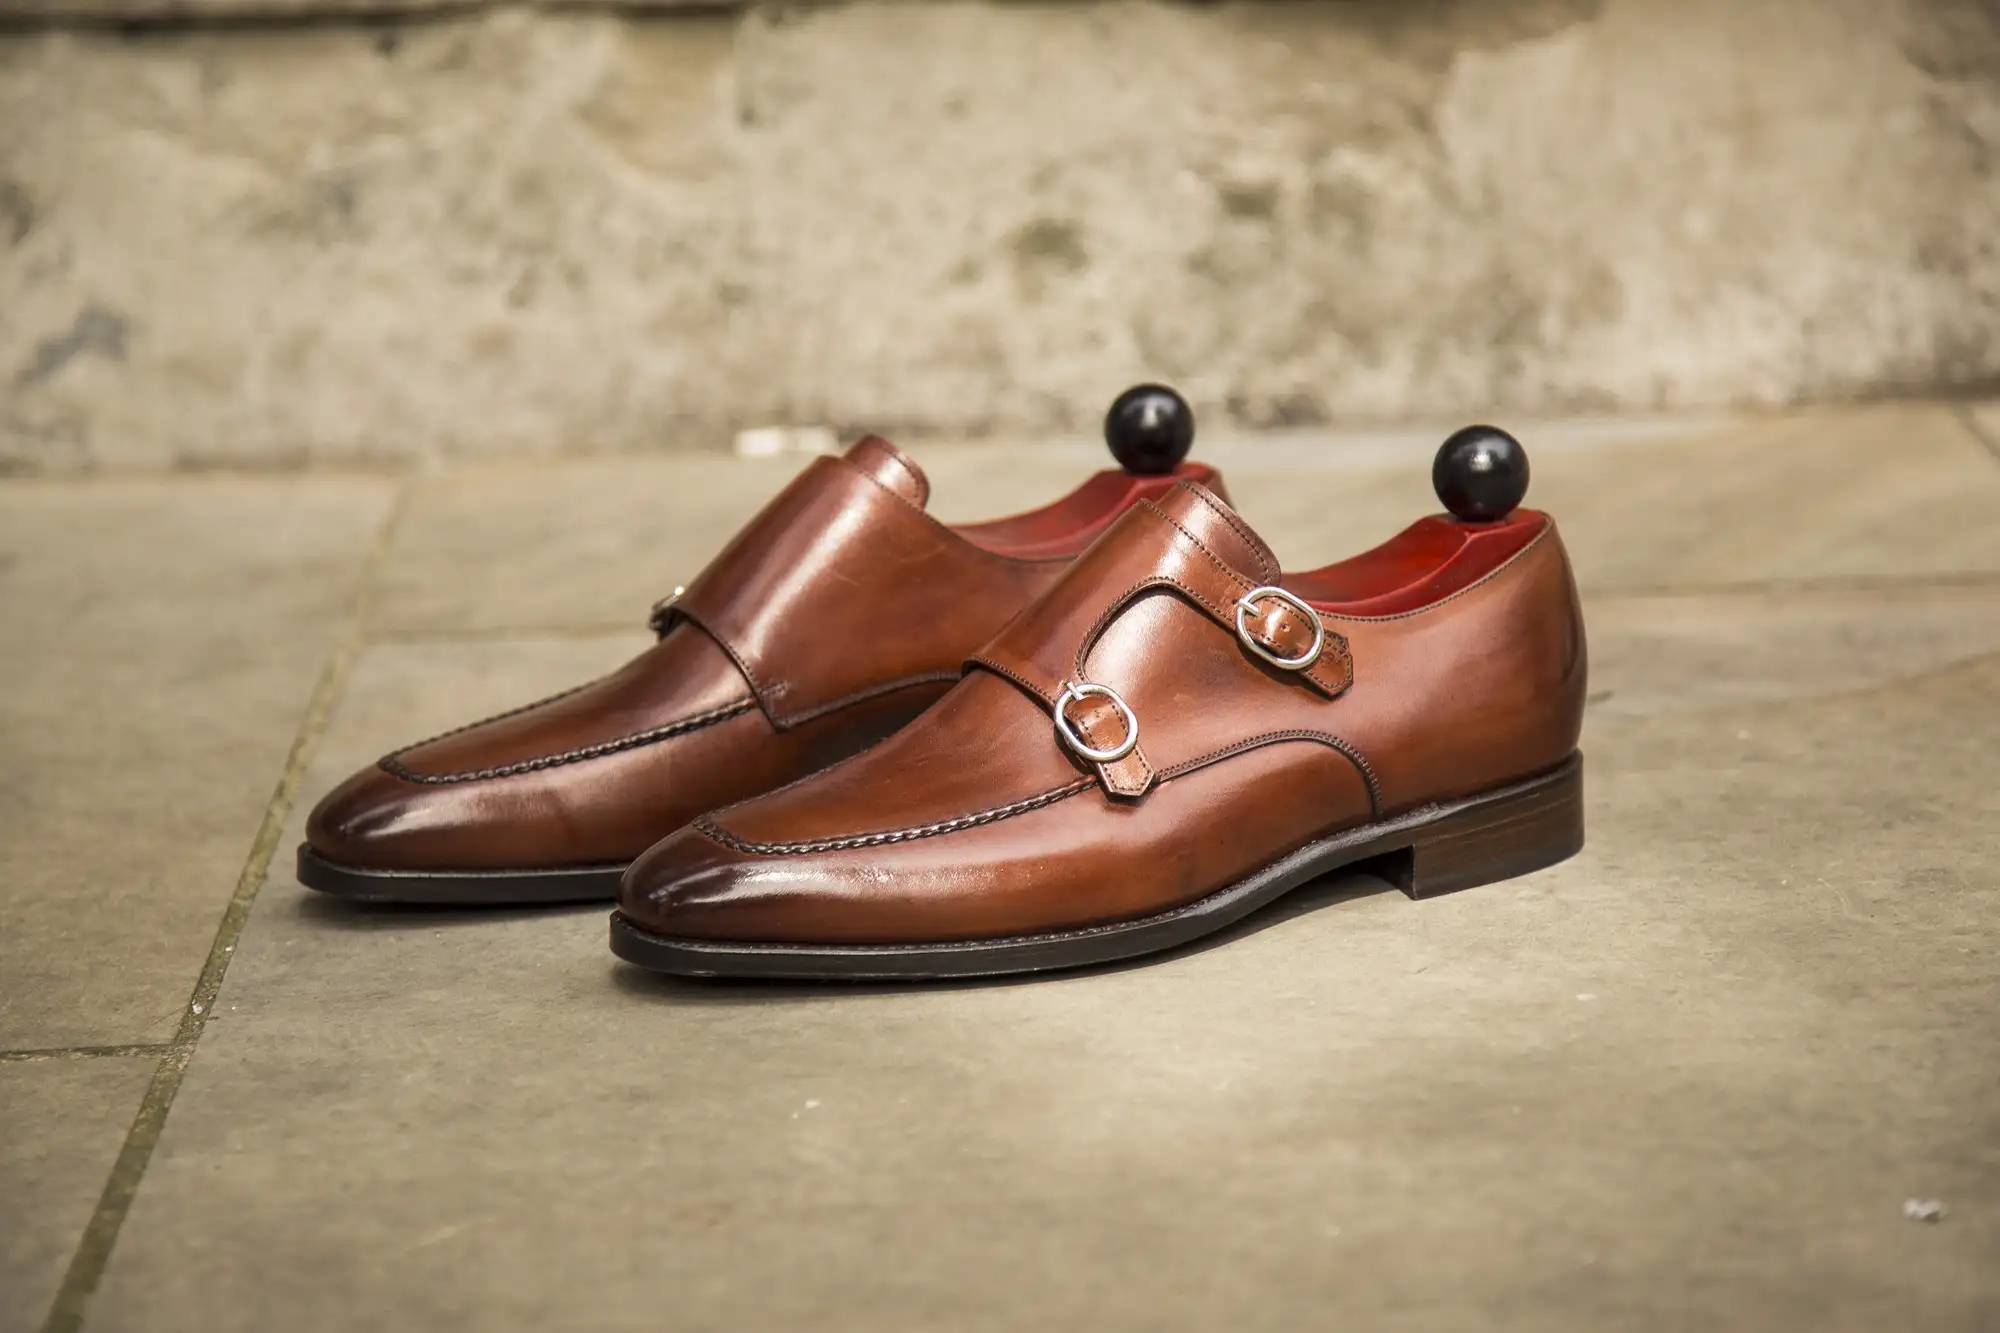 Goodyear welted shoes with a flex sole by J.FitzPatrick Footwear